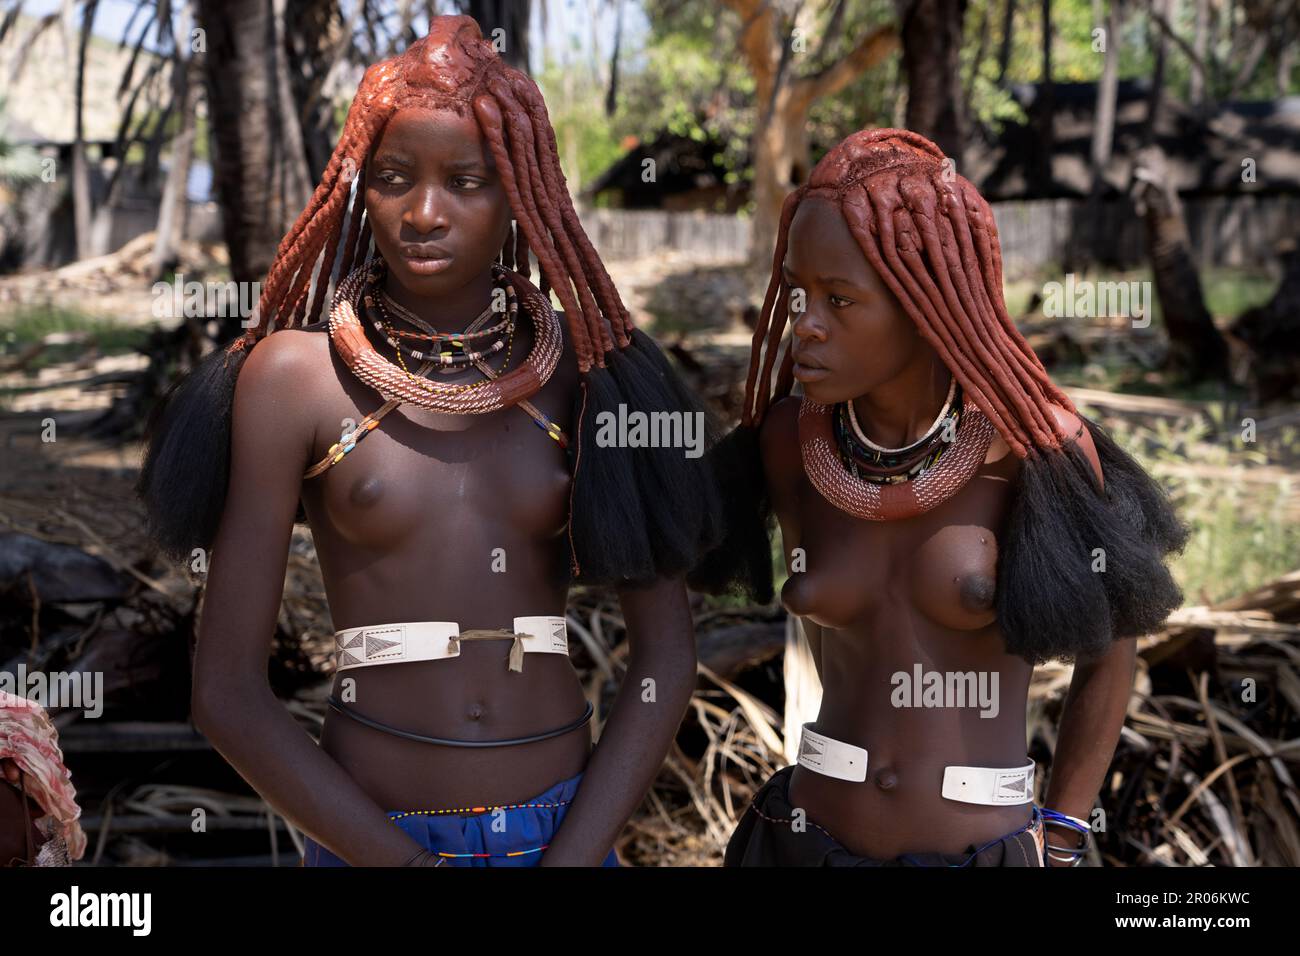 Himba people in Namibia- Young women of the tribe with a typical outfit stand bare chested Stock Photo